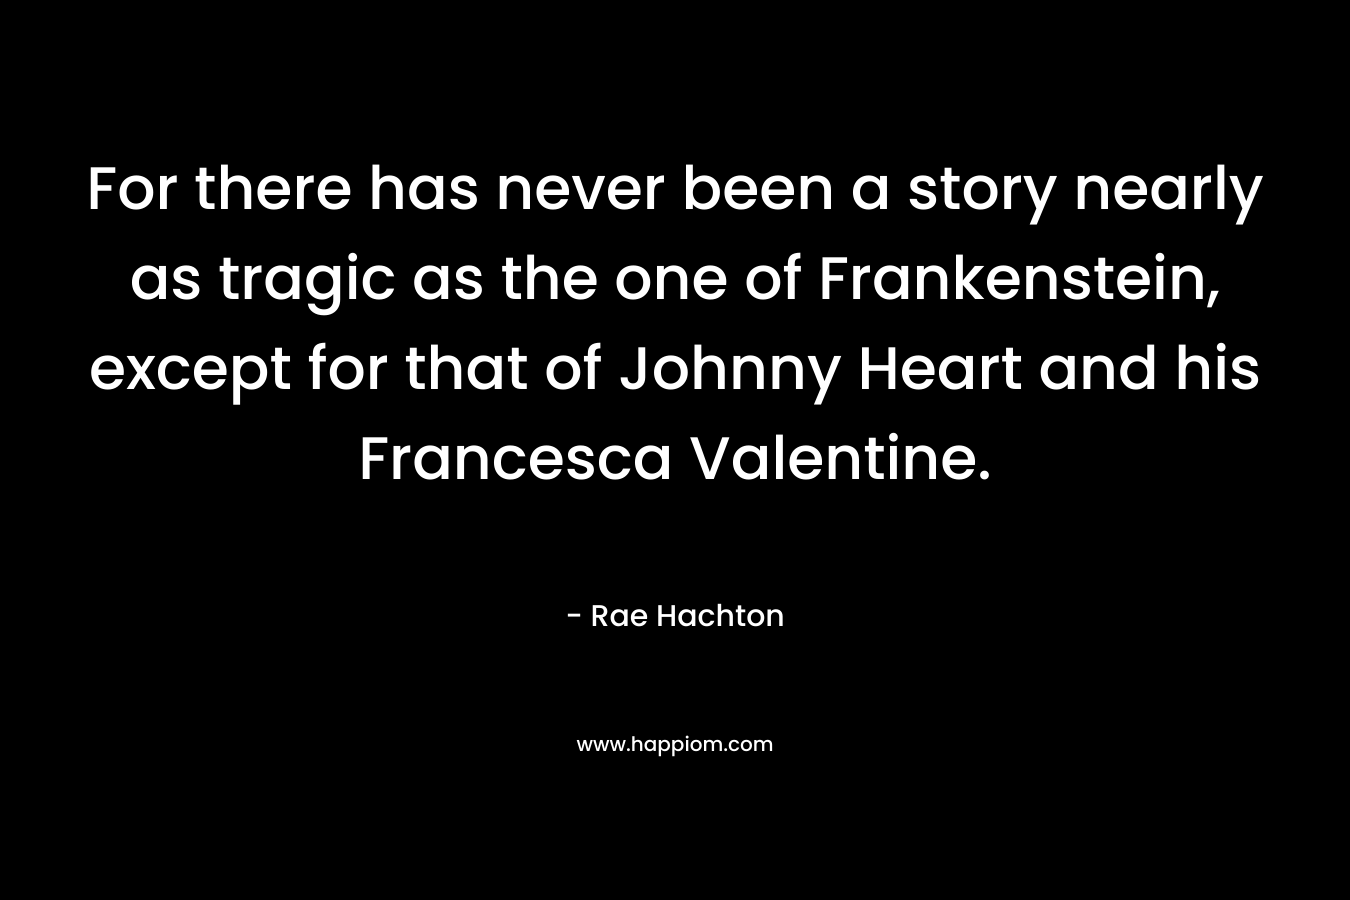 For there has never been a story nearly as tragic as the one of Frankenstein, except for that of Johnny Heart and his Francesca Valentine. – Rae Hachton